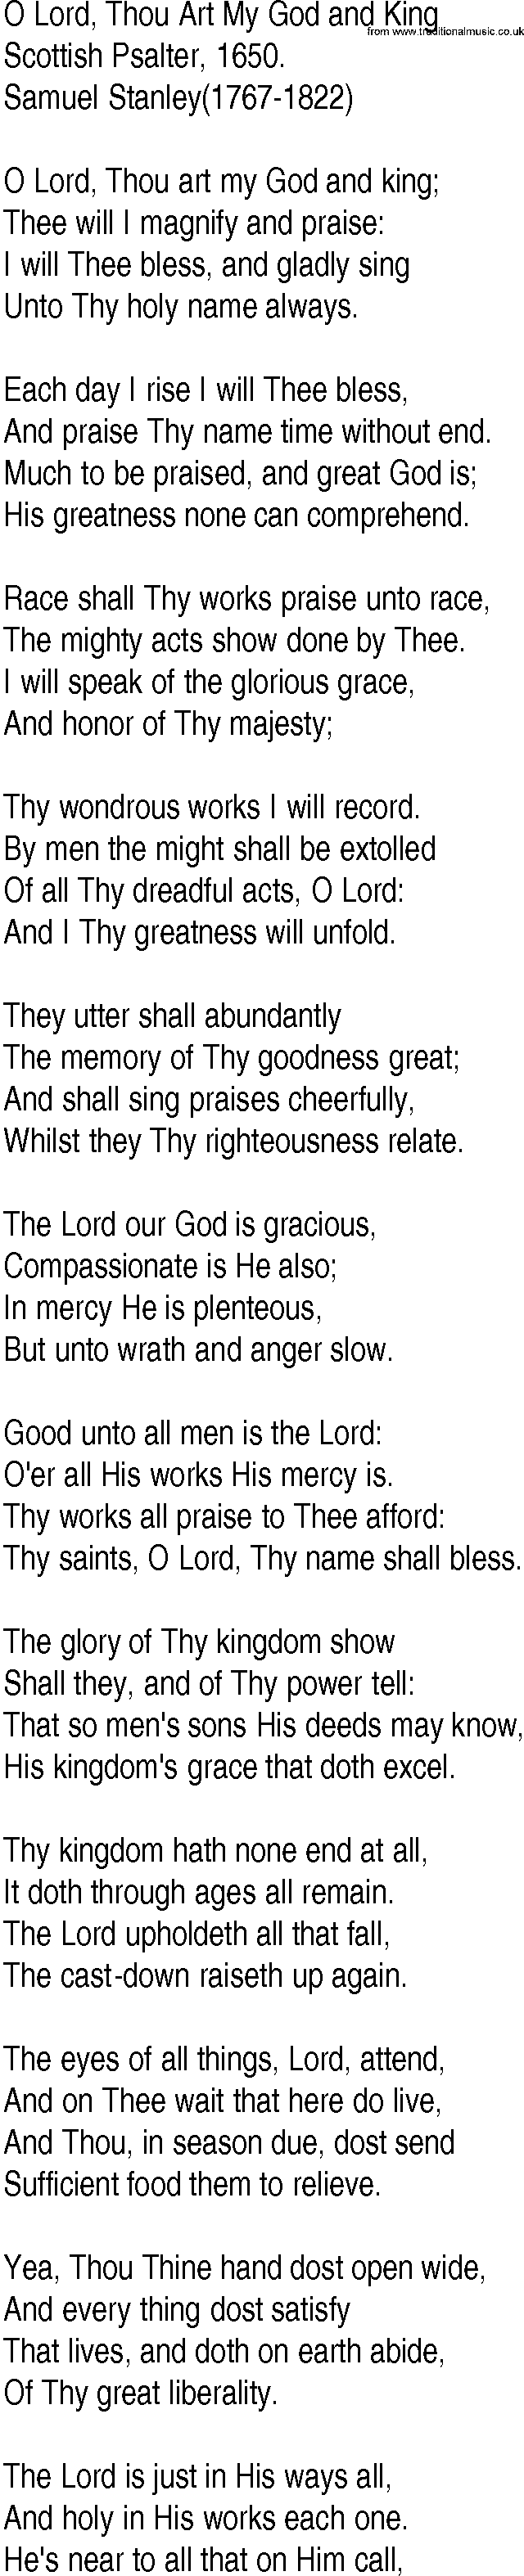 Hymn and Gospel Song: O Lord, Thou Art My God and King by Scottish Psalter lyrics